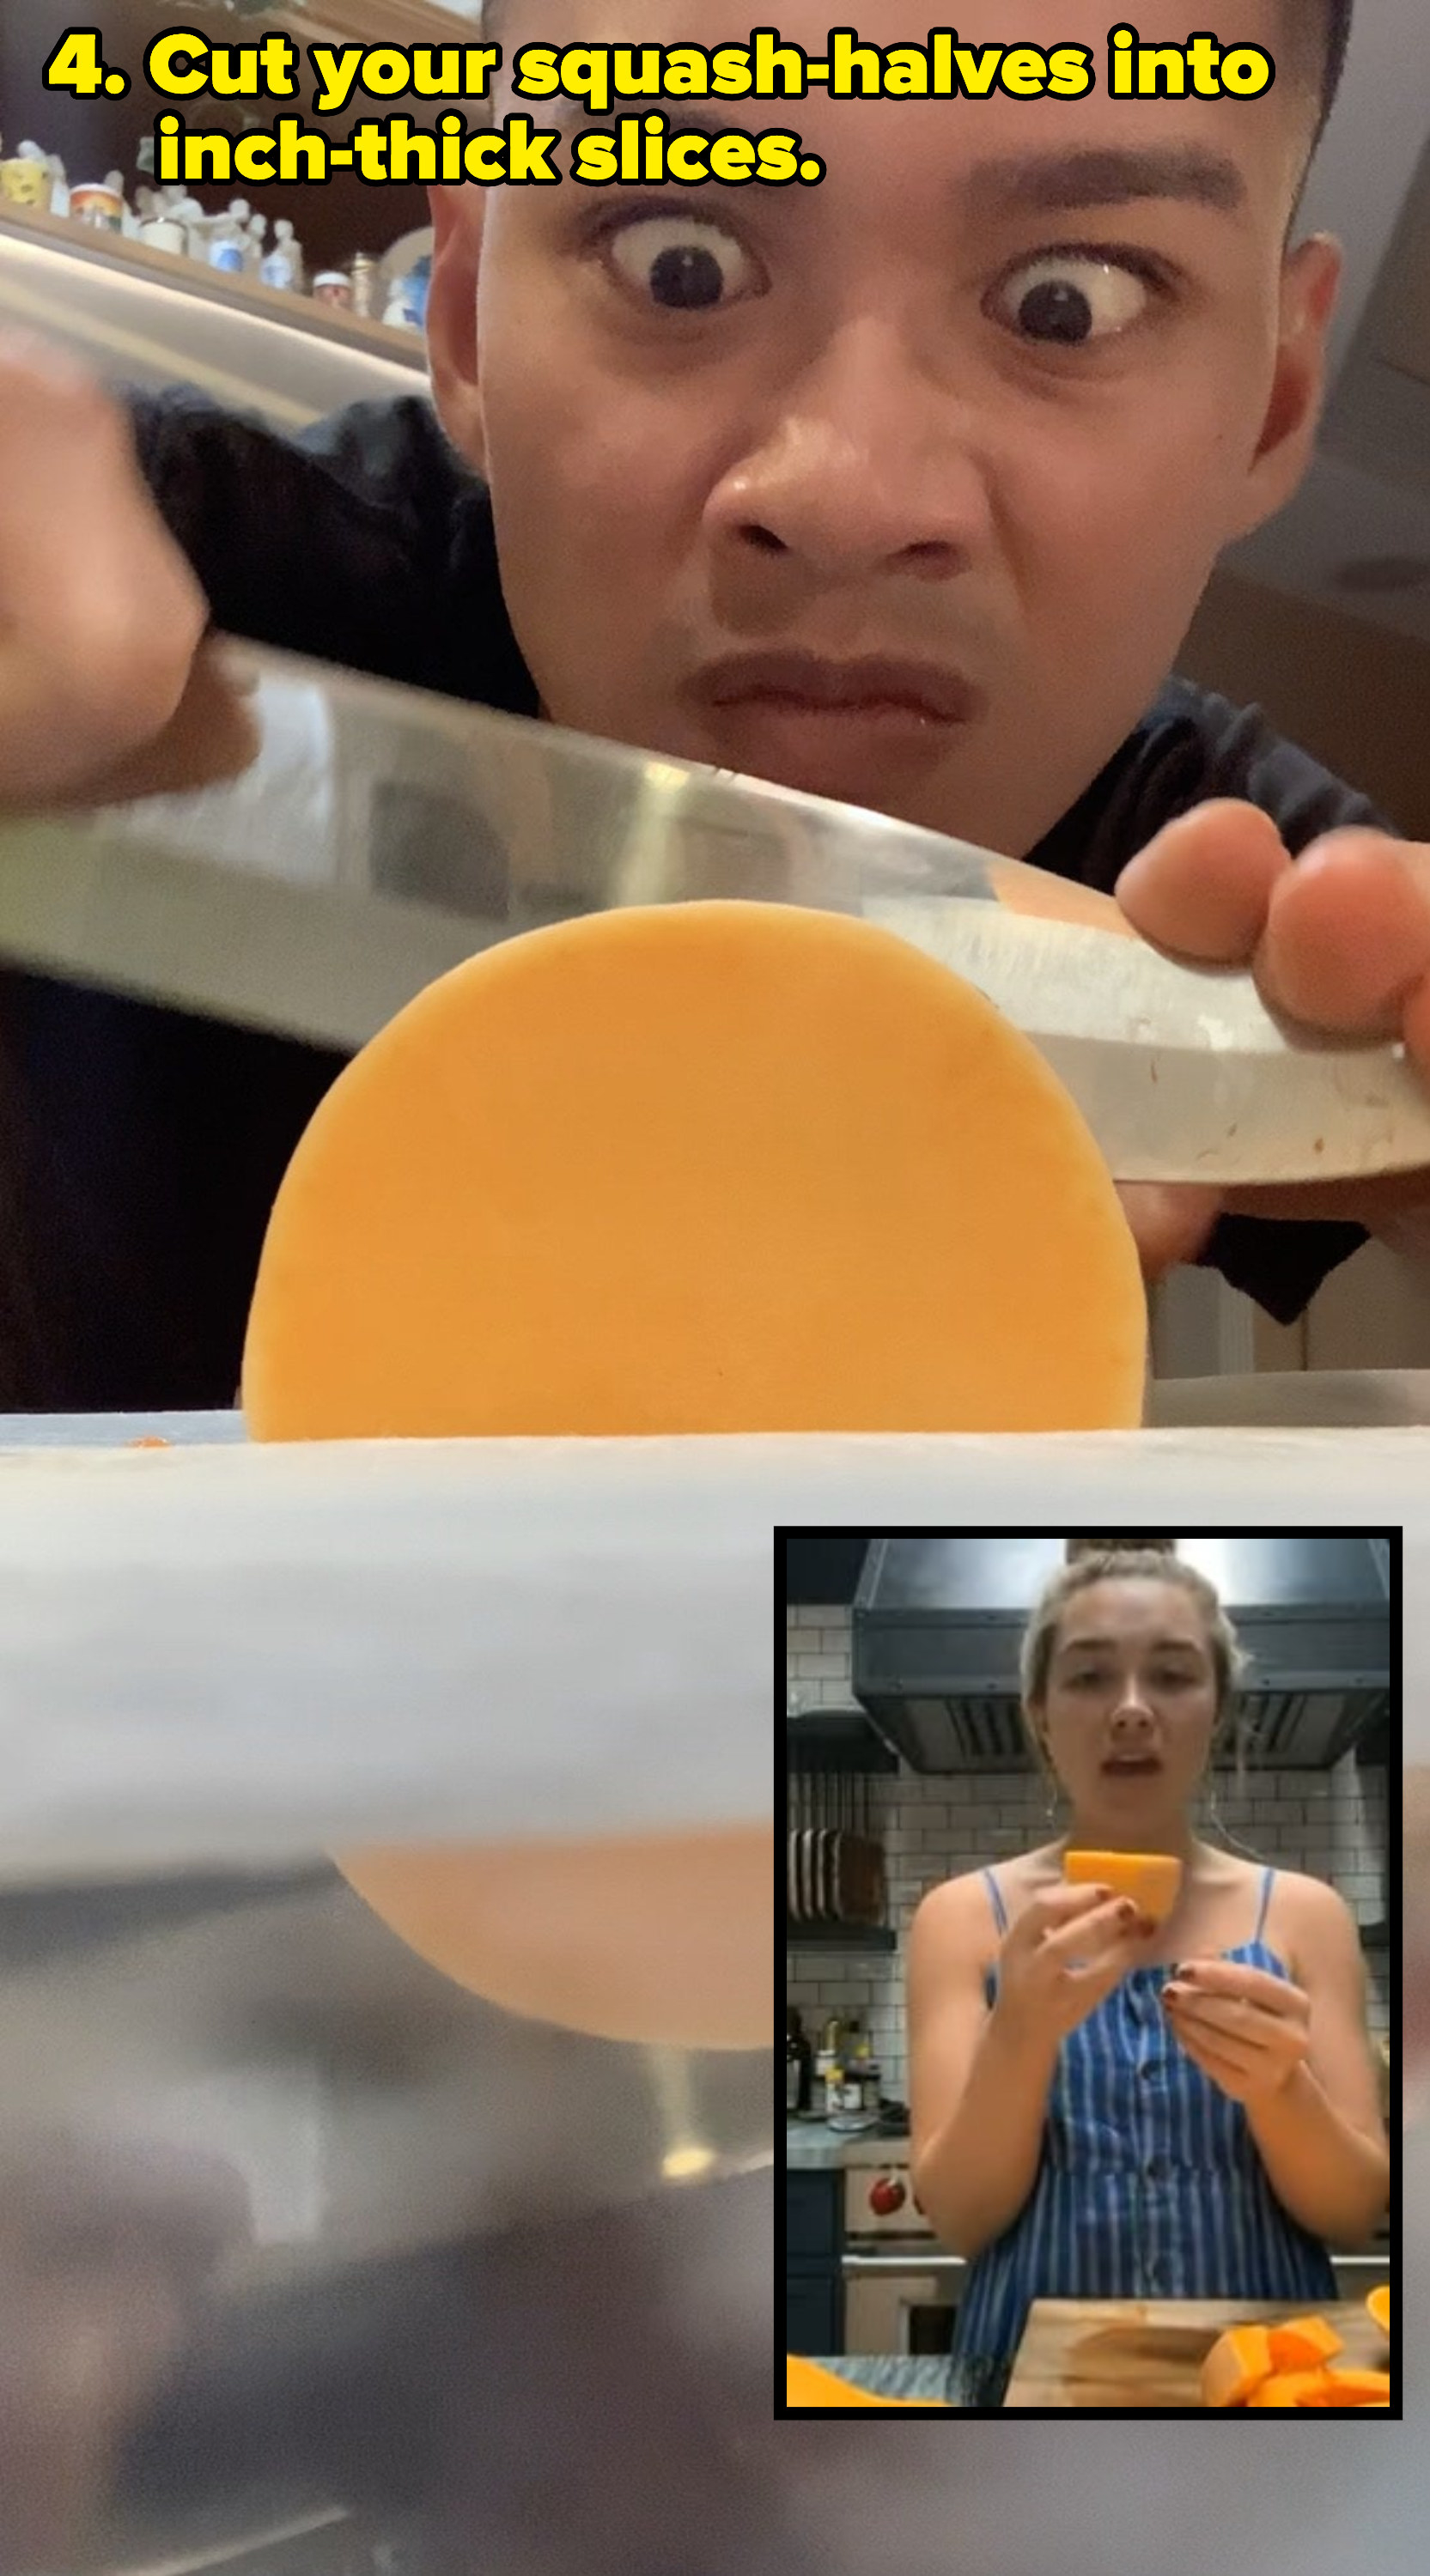 author cutting butternut squash into slices (inset) florence pugh holding a slice of butternut squash